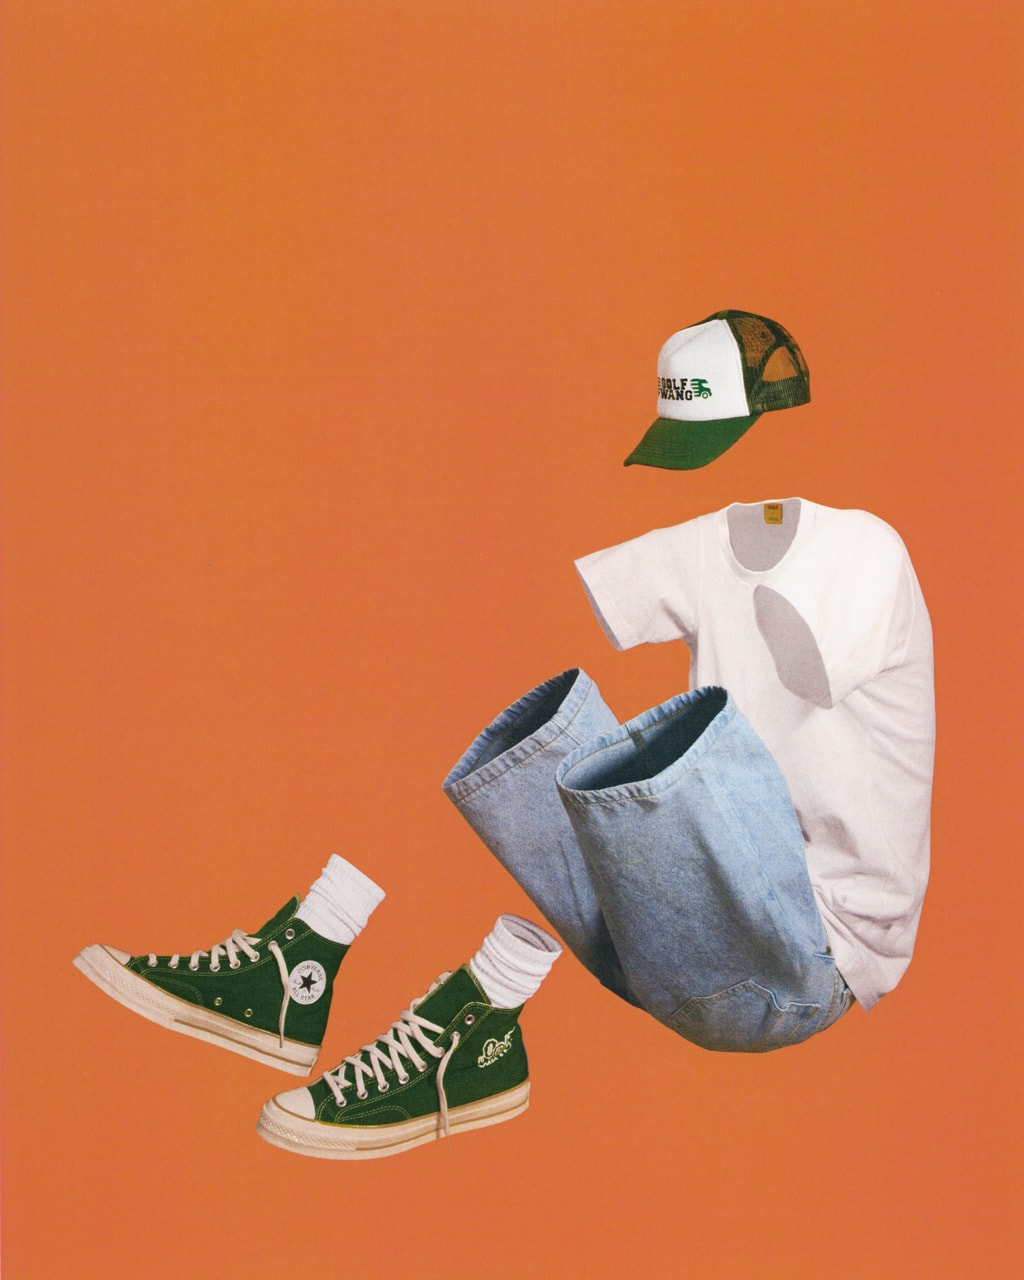 Tyler, the Creator's New Converse Sneakers Are As Bright and Happy